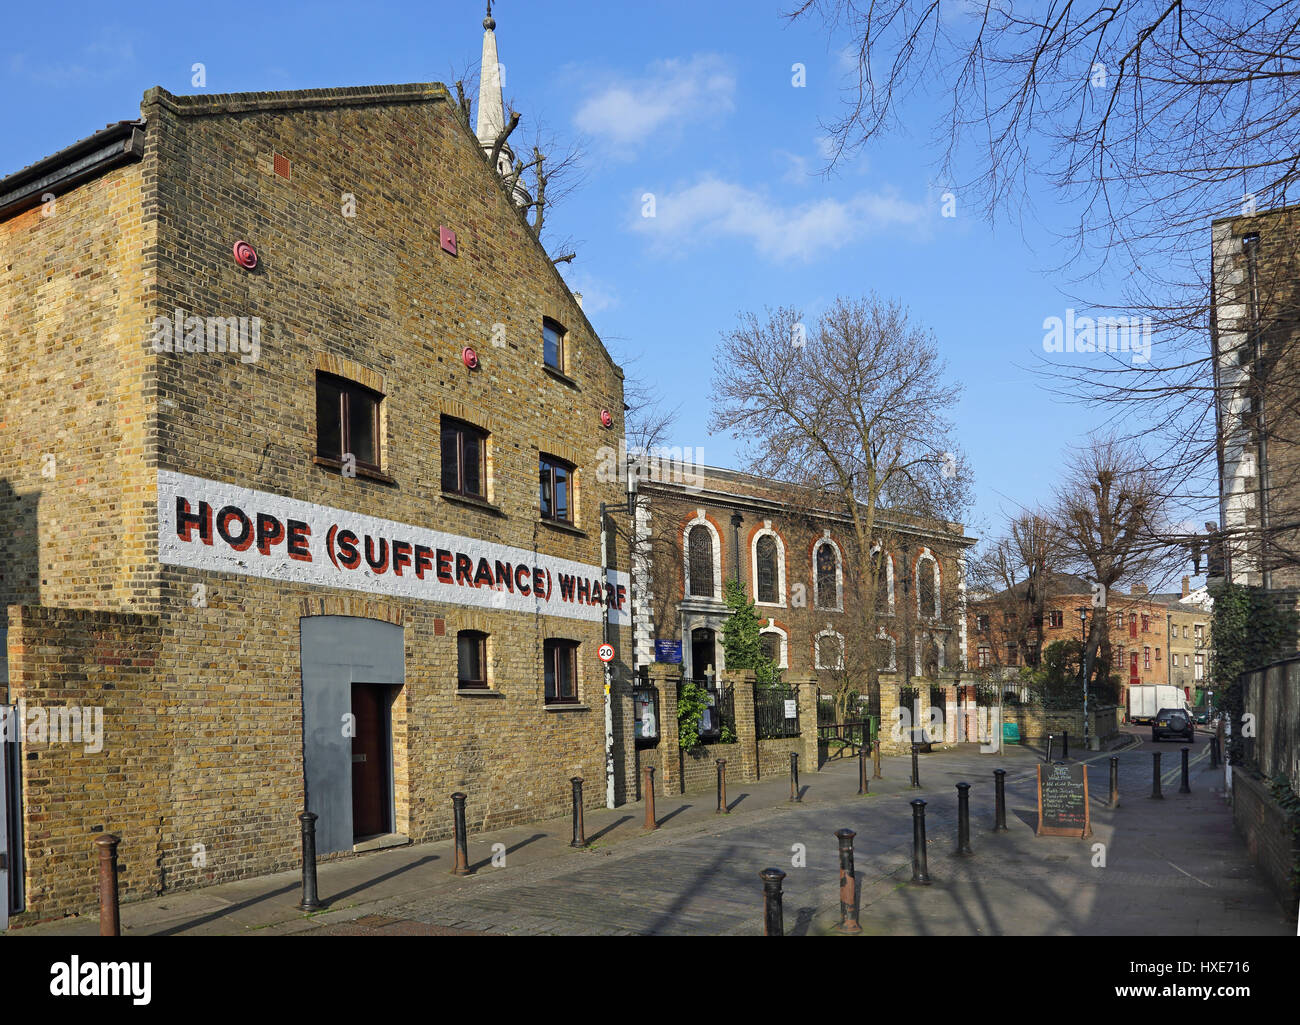 Hope Sufferance Wharf. Refurbished Victorian warehouses in Rotherhithe, East London, UK. Next to the church of St Mary the Virgin. Stock Photo